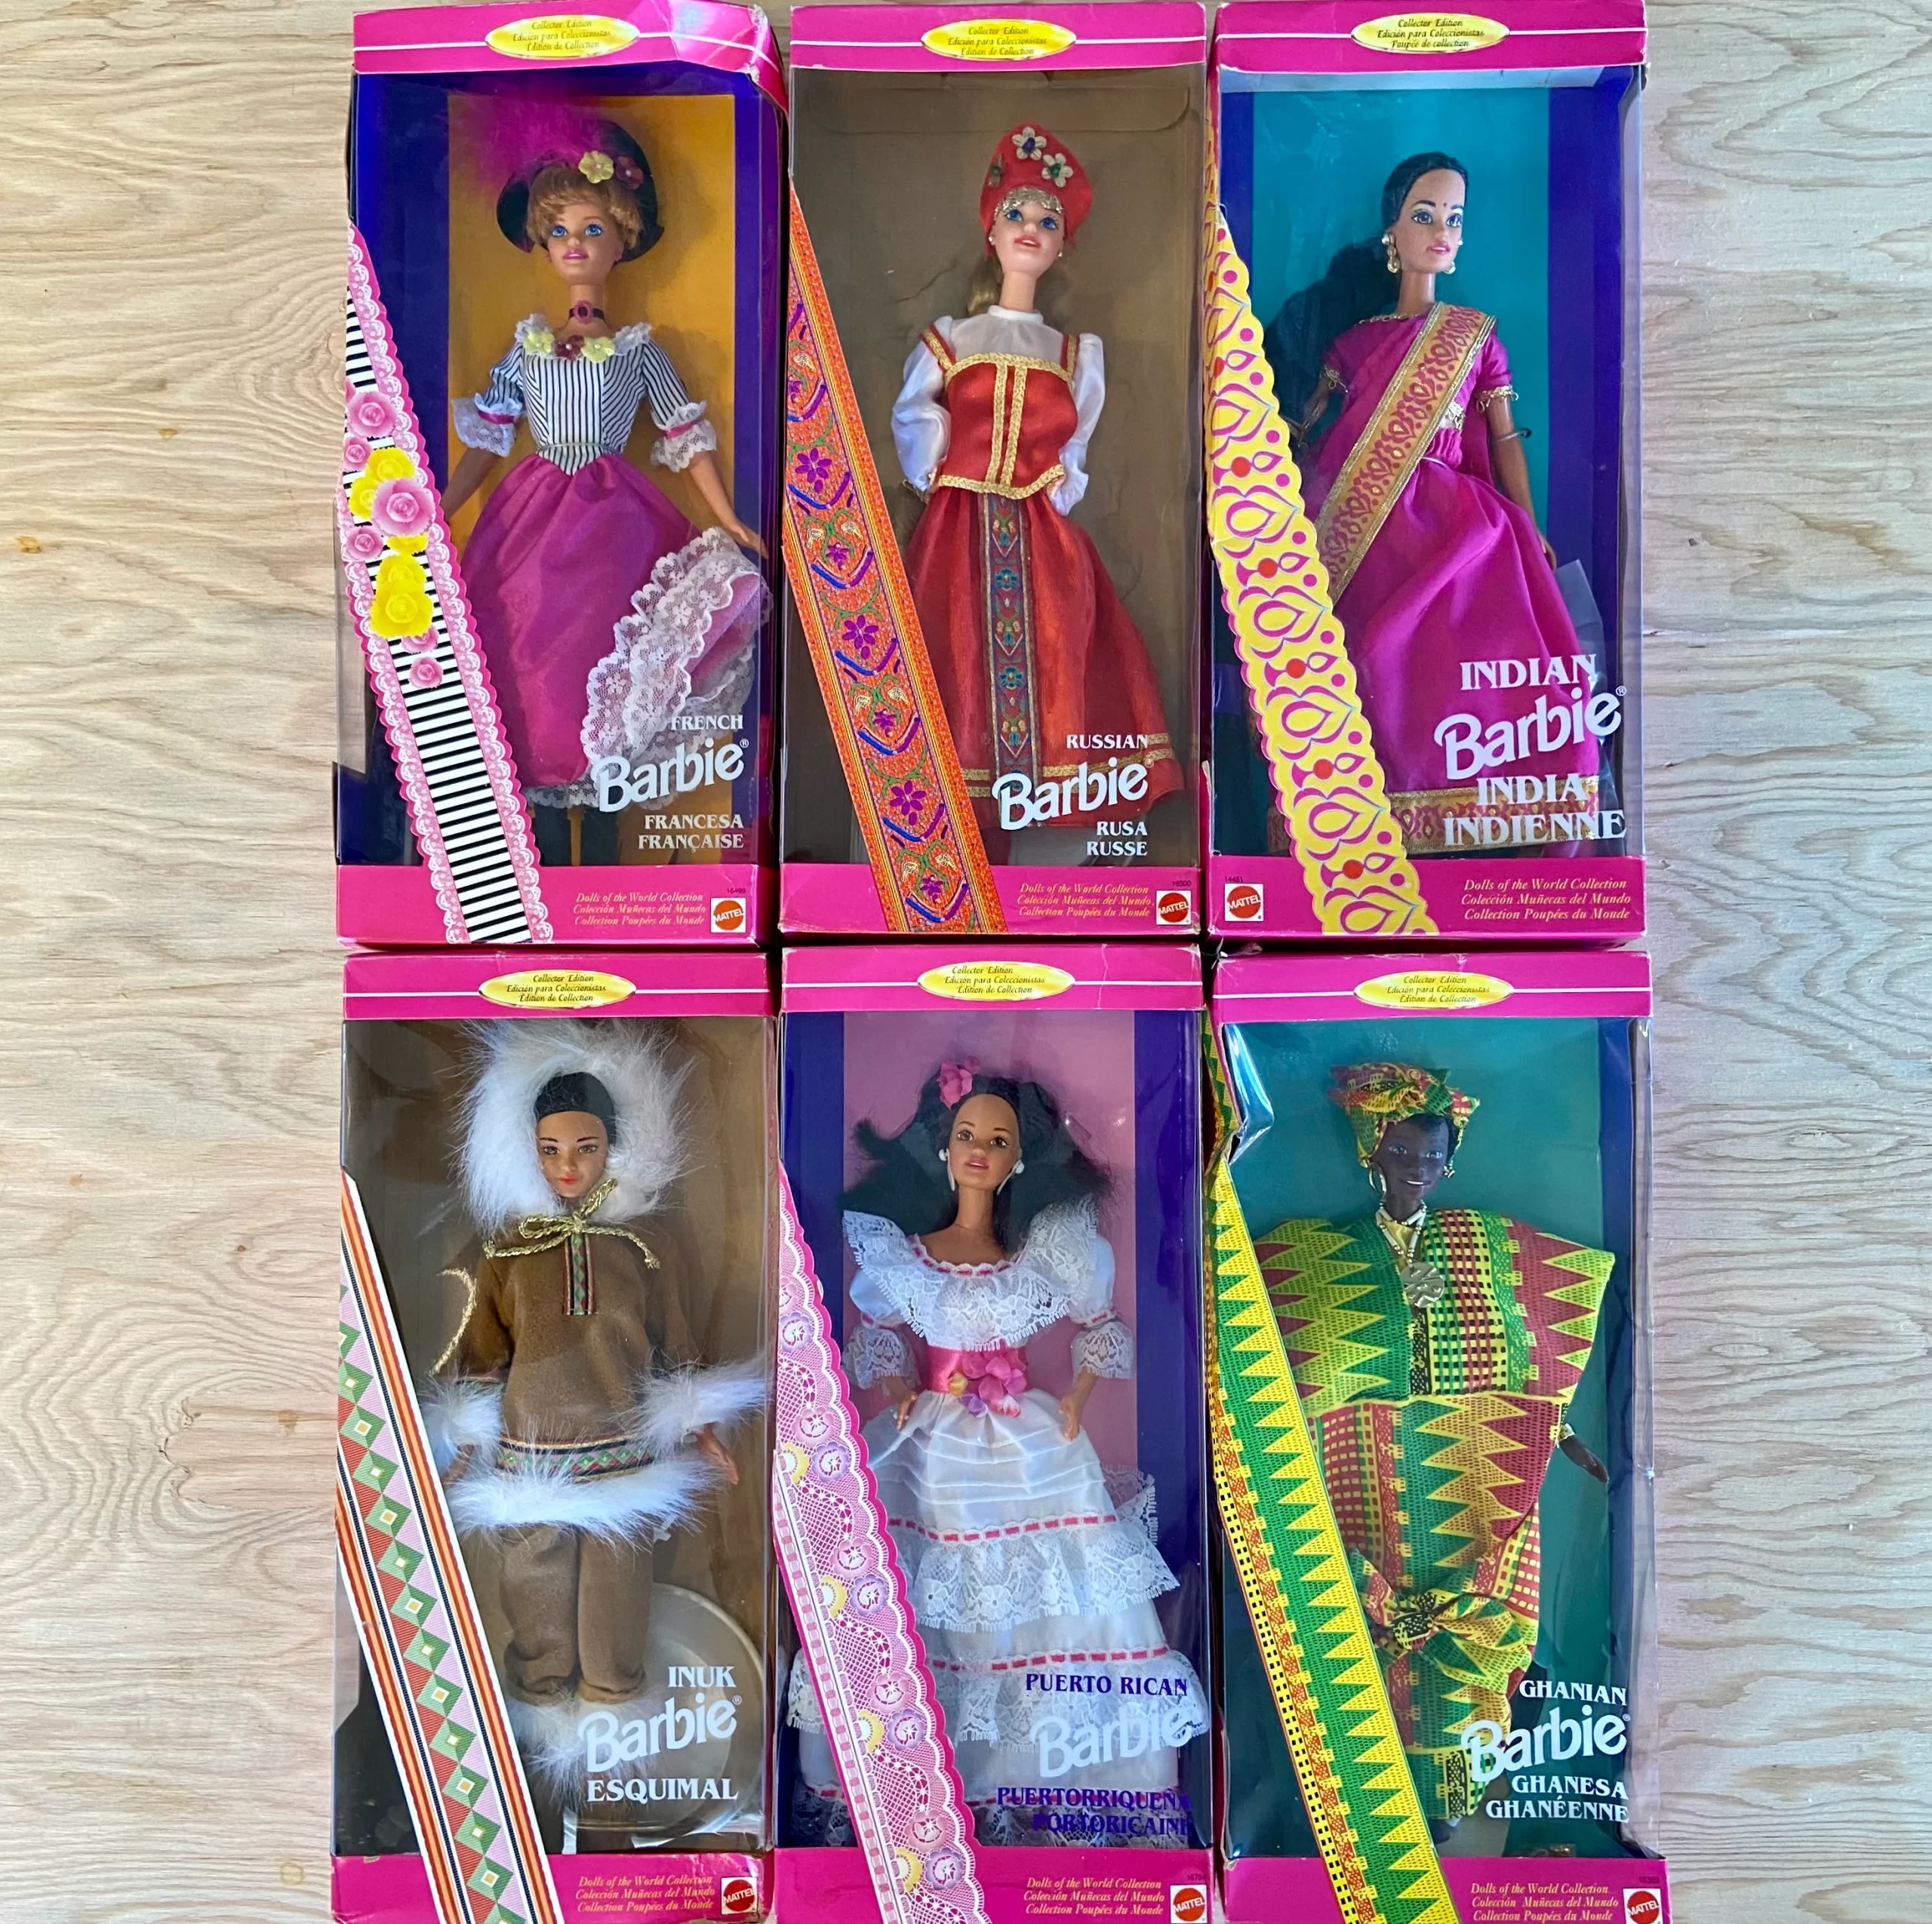 Six Barbie Dolls of the World: French Barbie, Russian Barbie, Indian Barbie, Inuit Barbie, Puerto Rican Barbie, and Ghanian Barbie.